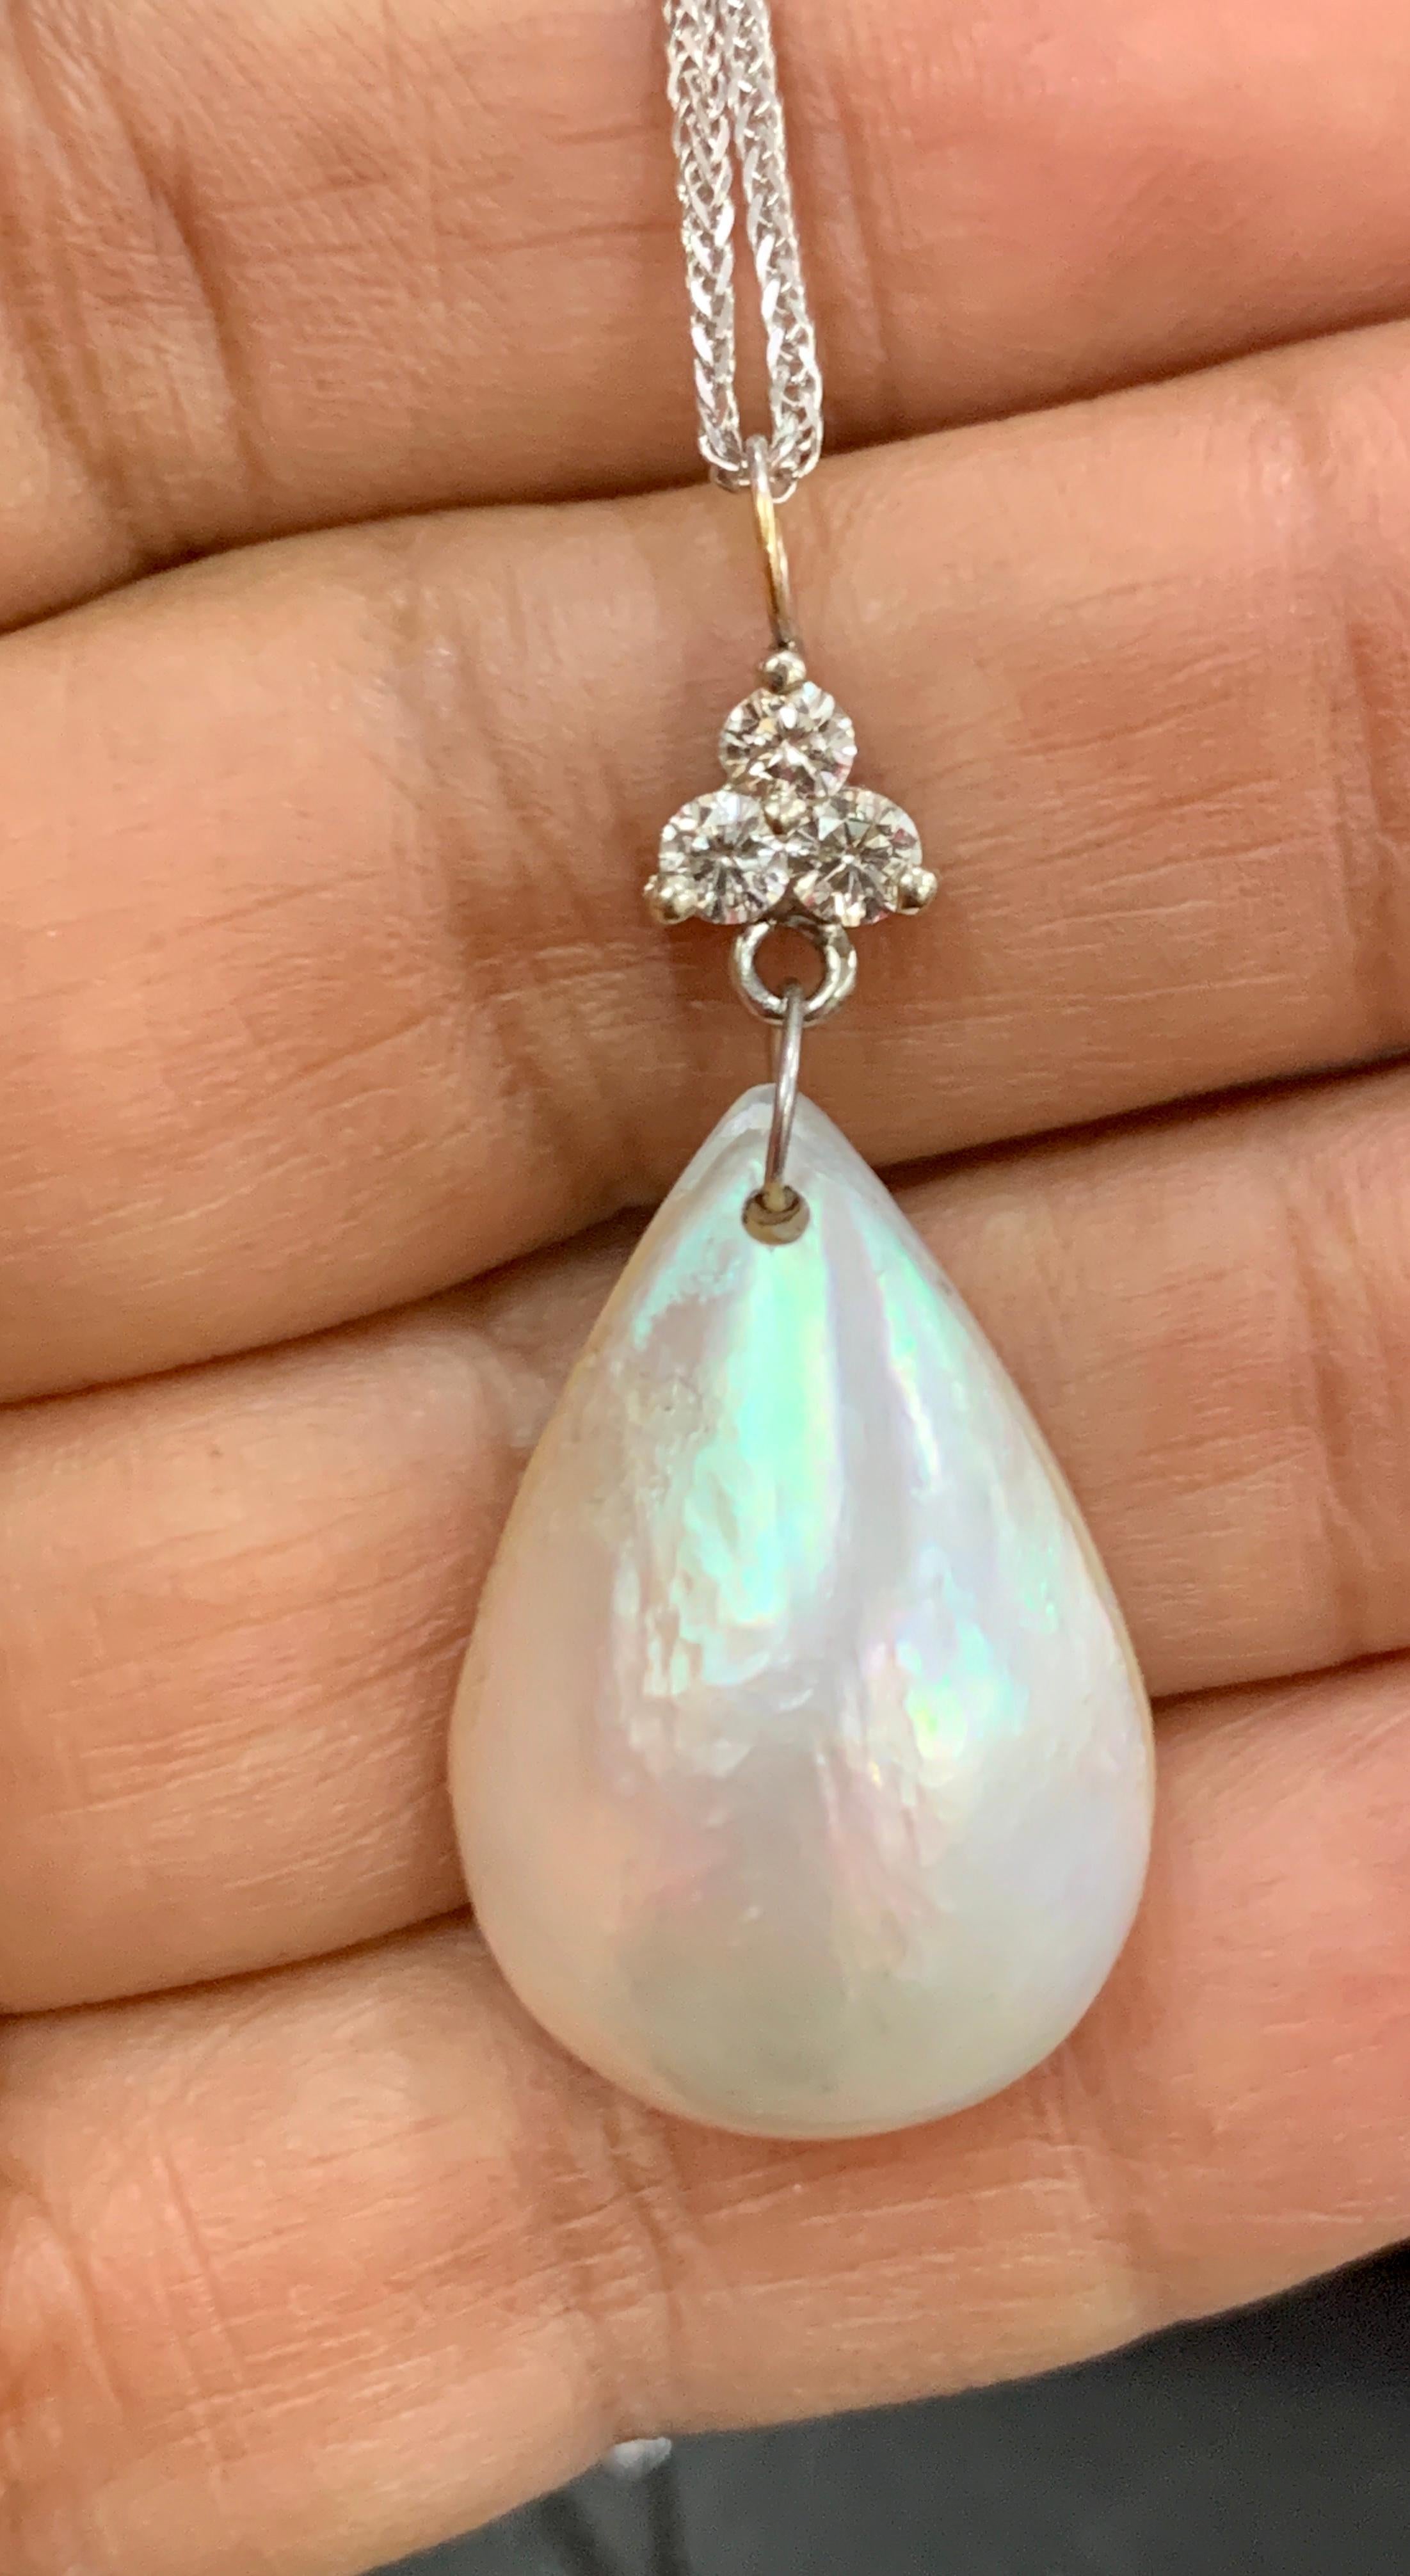 Pear Mabe Pearl & 0.36 Ct Diamond  Pendant/ Necklace 14 Kt White Gold with Chain
17 mm wide and 25 mm tall pear shape mabe pearl wit three diamonds approximately 0.36 ct 
Diamond Weight  approximately 0.35 Carats
Diamonds are SI quality.
14 K gold